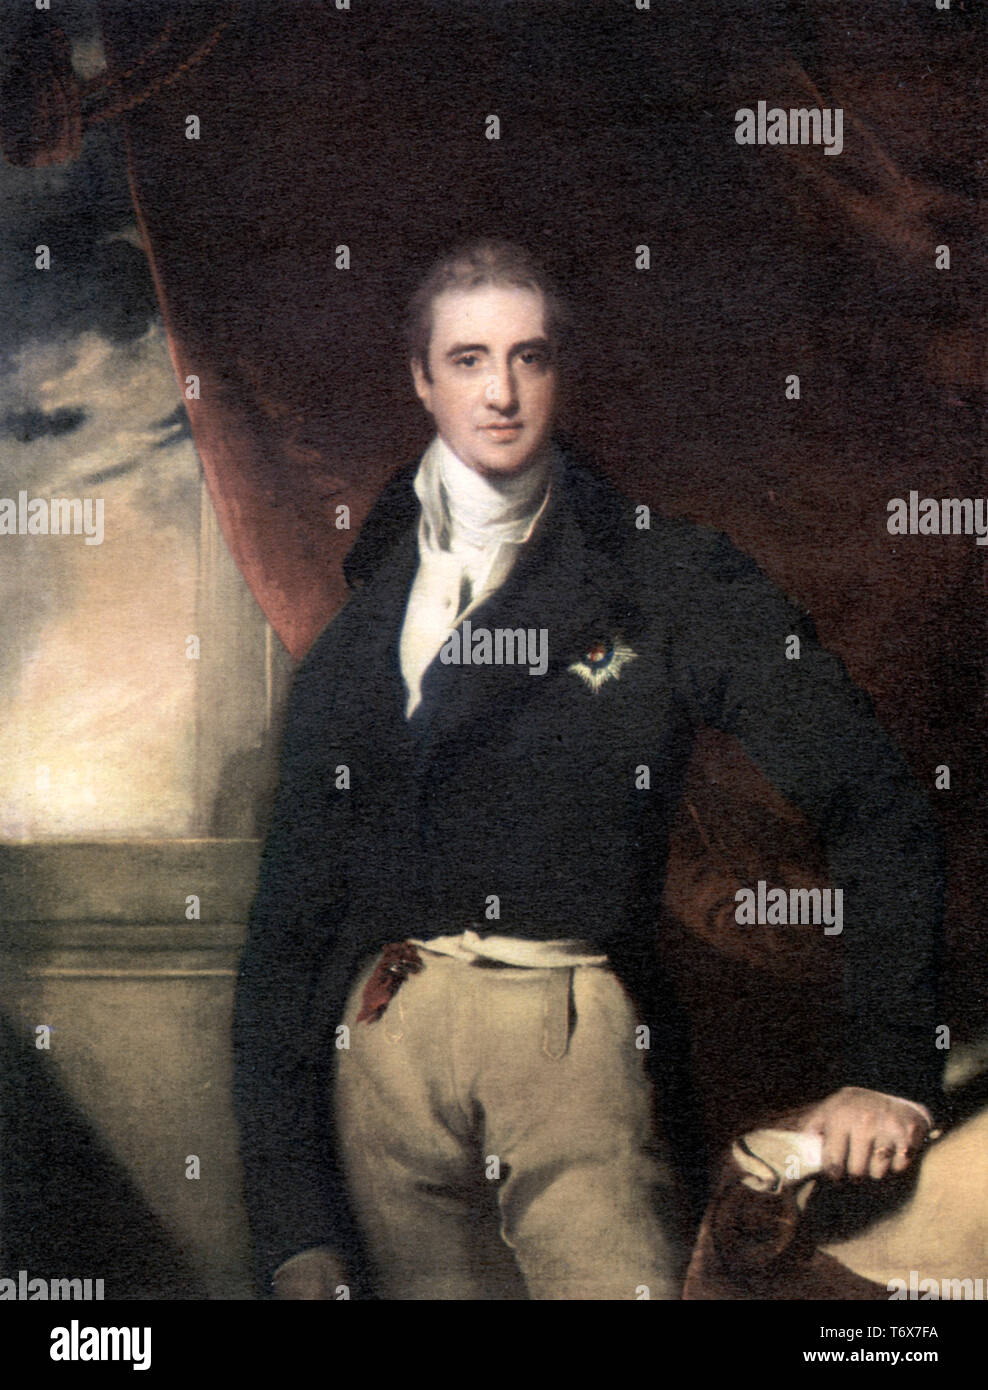 Robert Stewart, 2nd Viscount Castlereagh and 2nd Marquess of Londonderry (1769-1822), c1814. By Sir Thomas Lawrence (1769-1830). Lord Castlereagh, Irish/British statesman. As British Foreign Secretary, from 1812 he was central to the management of the coalition that defeated Napoleon and was the principal British diplomat at the Congress of Vienna. Castlereagh was also leader of the British House of Commons in the Liverpool government from 1812 until his suicide. As Chief Secretary for Ireland, he was involved in putting down the Irish Rebellion of 1798. Stock Photo